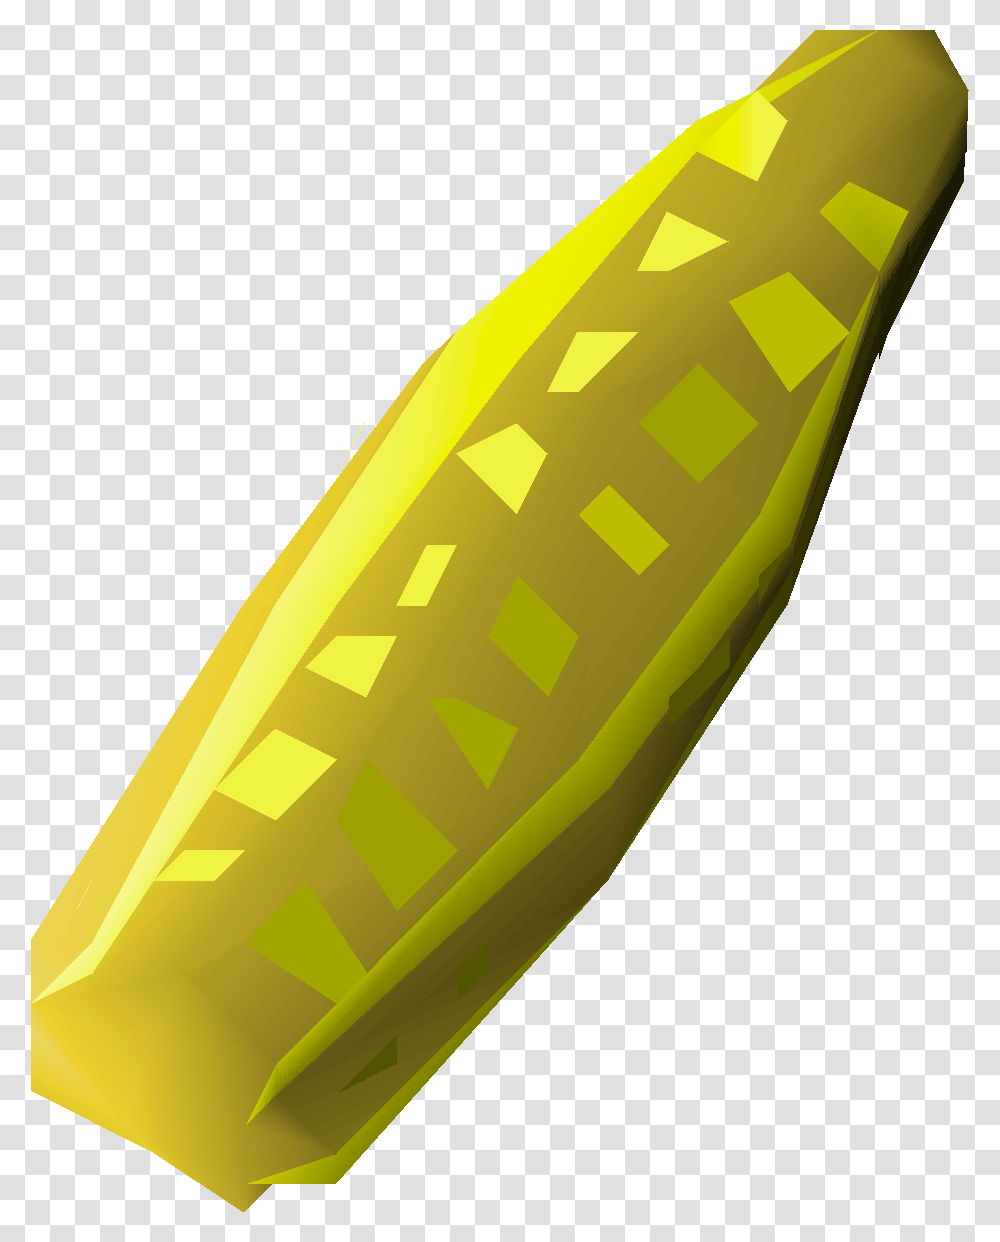 Old School Runescape Wiki, Plant, Vegetable, Food, Bamboo Shoot Transparent Png